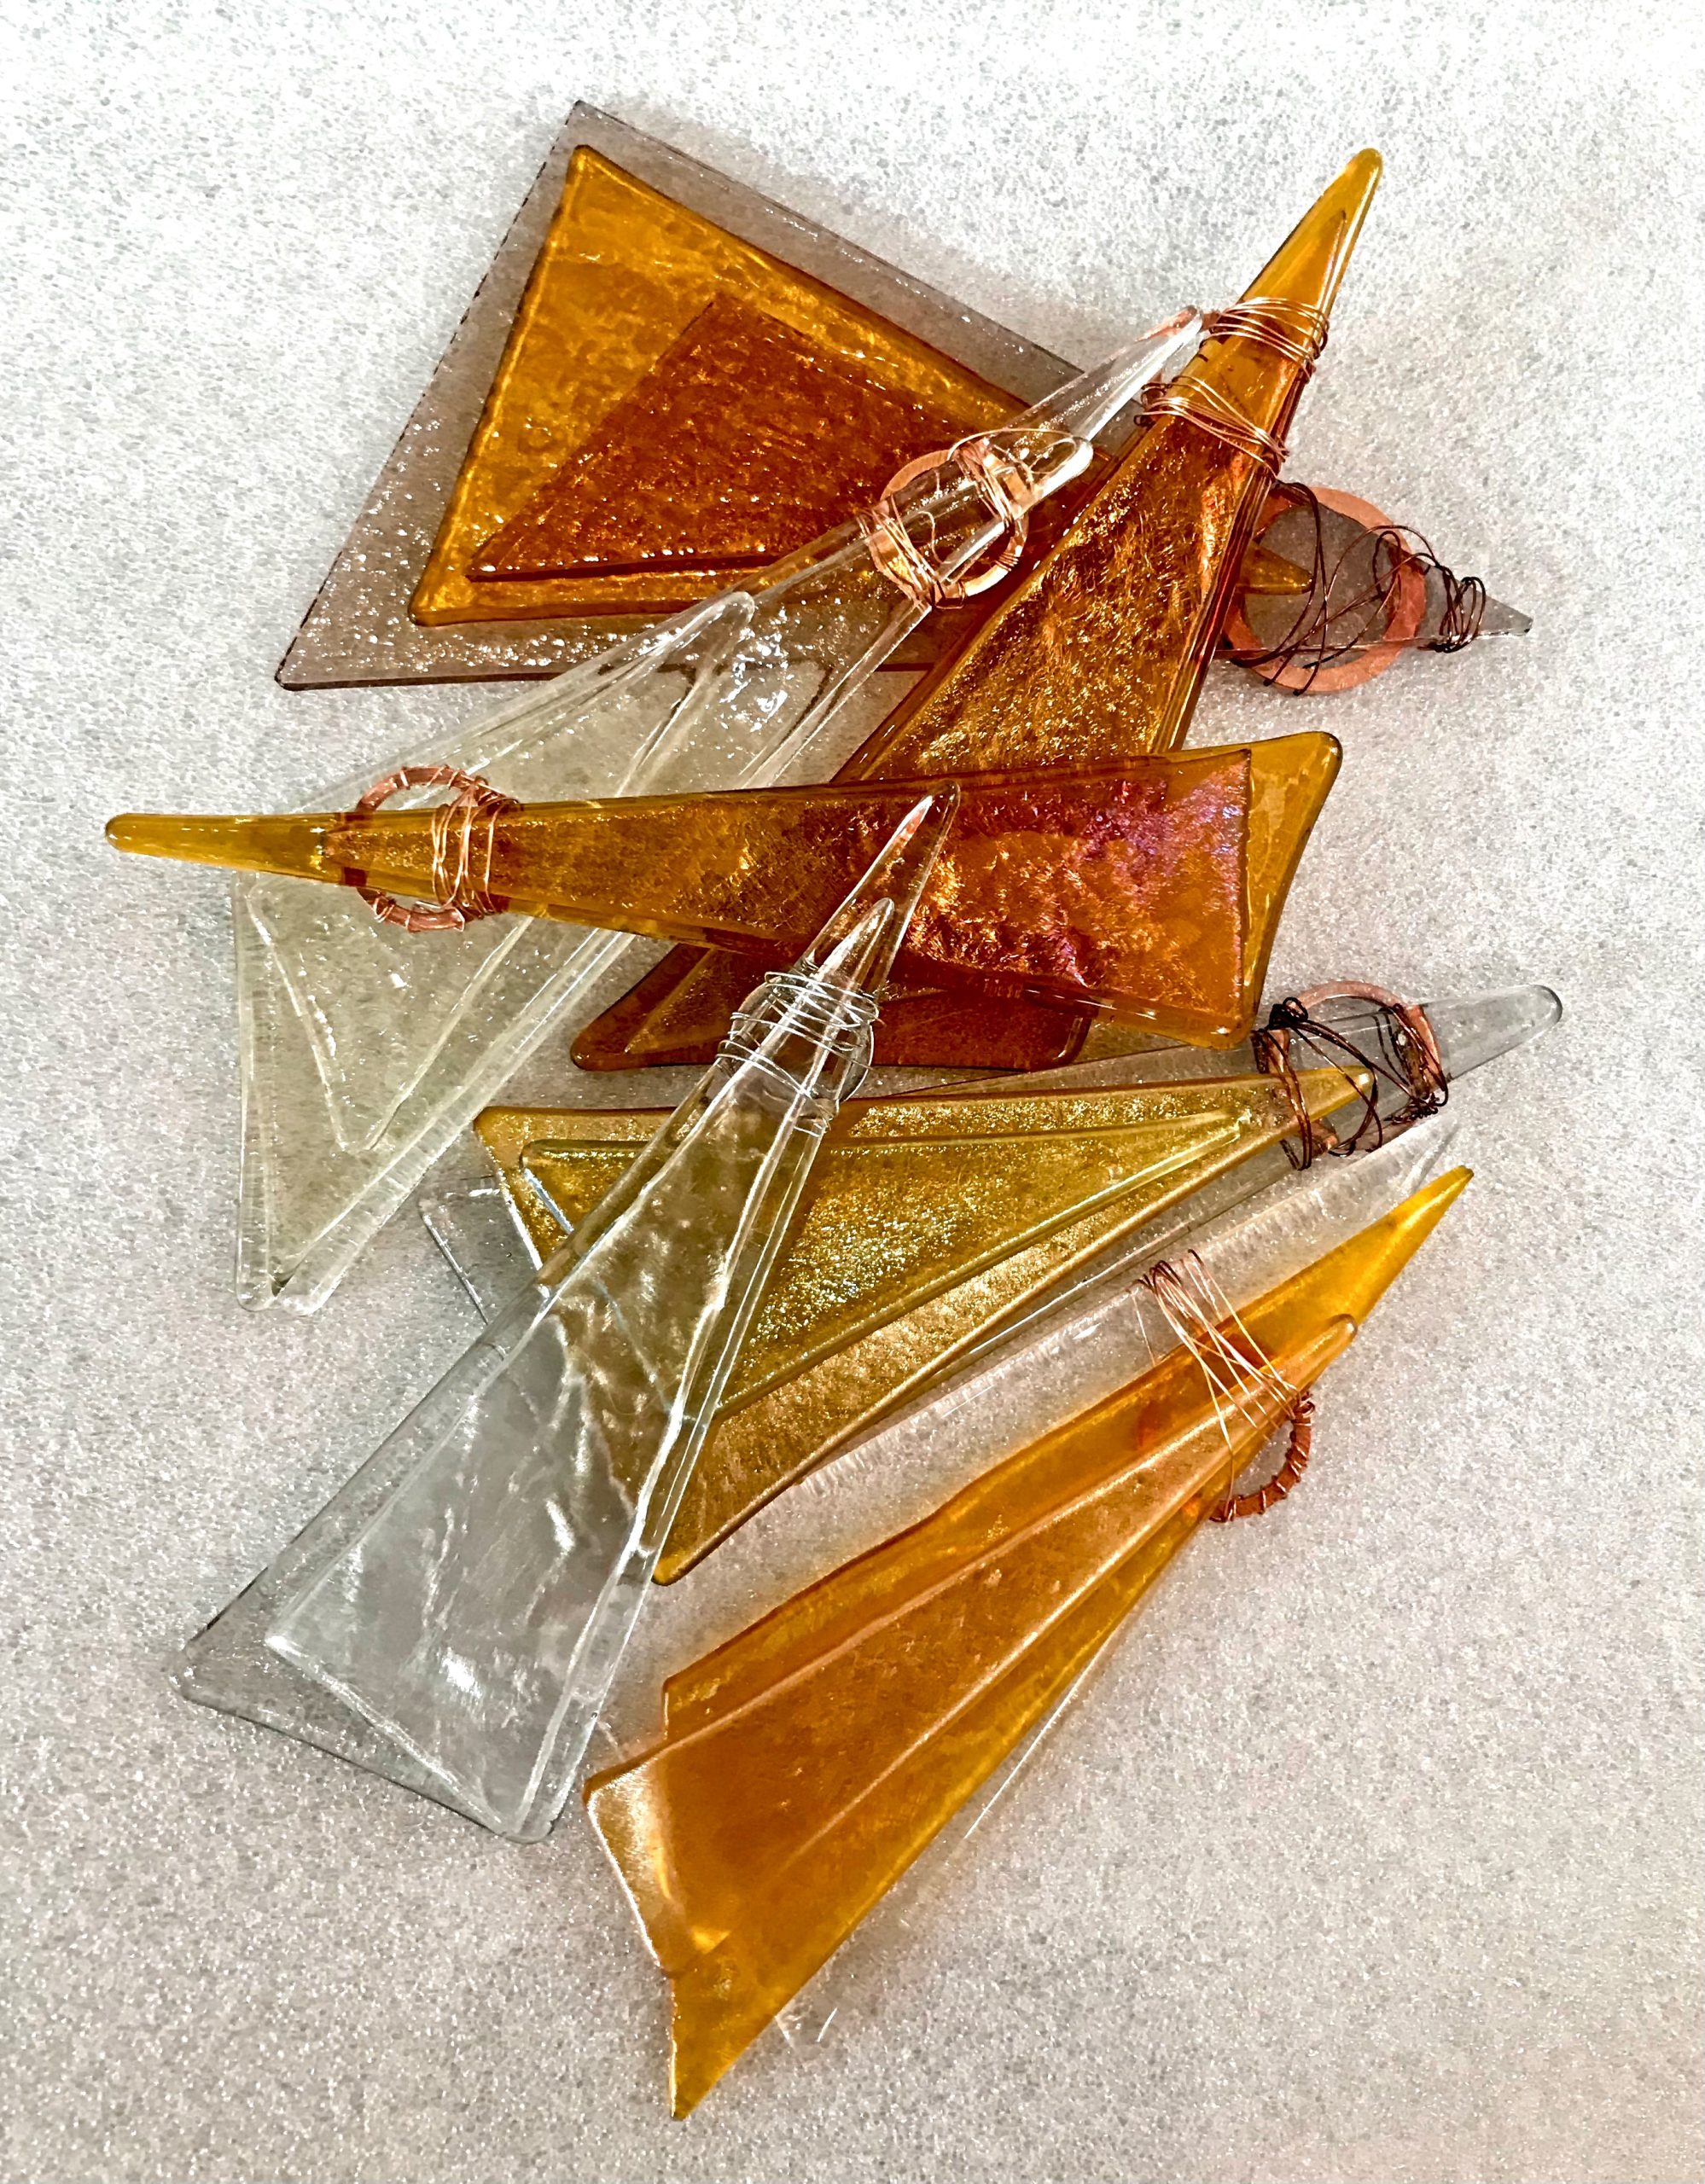 Cast glass Christmas tree ornaments by Heather Cuell | Effusion Art Gallery + Cast Glass Studio, Invermere BC